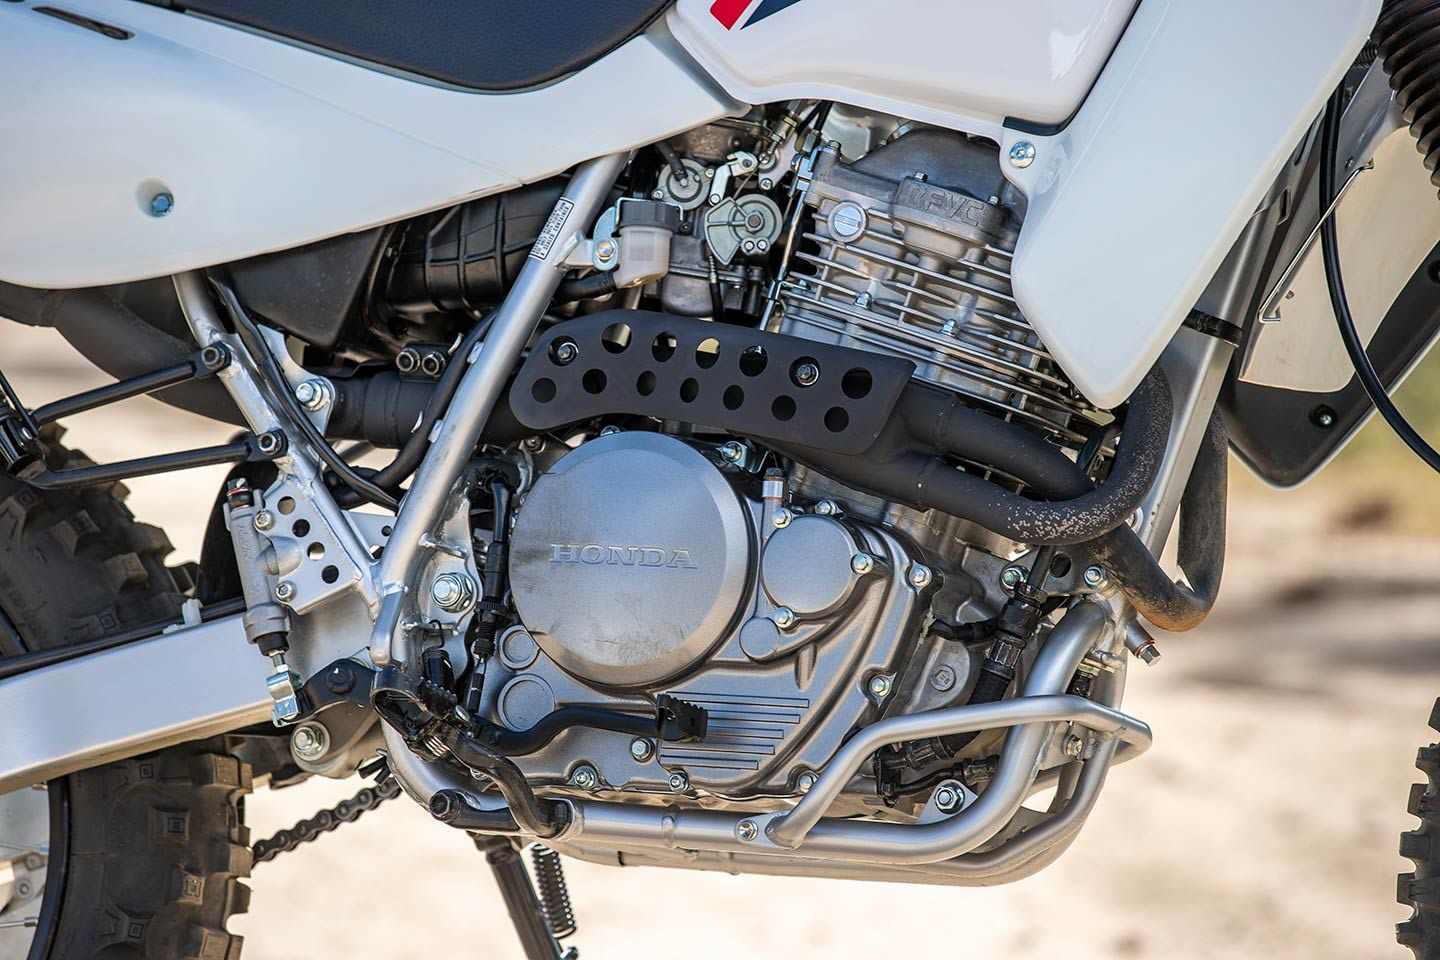 In 2023, the 644cc air-cooled single-cylinder engine produced 34.05 hp and 31.42 lb.-ft. of torque on the <i>Cycle World</i> dyno. (2023 model shown.)